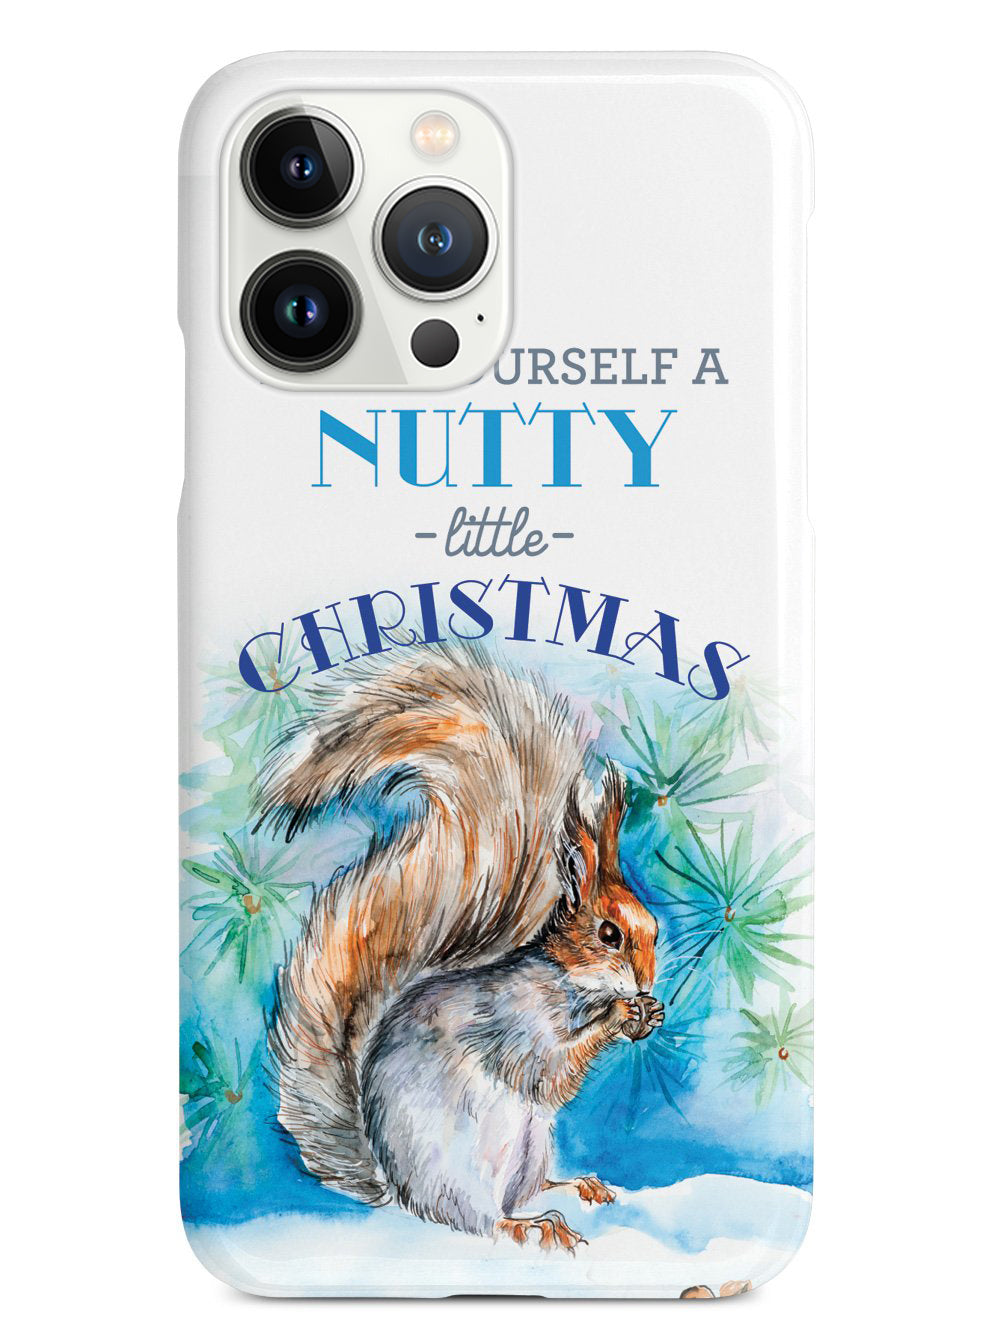 Have Yourself a Nutty Little Christmas Case